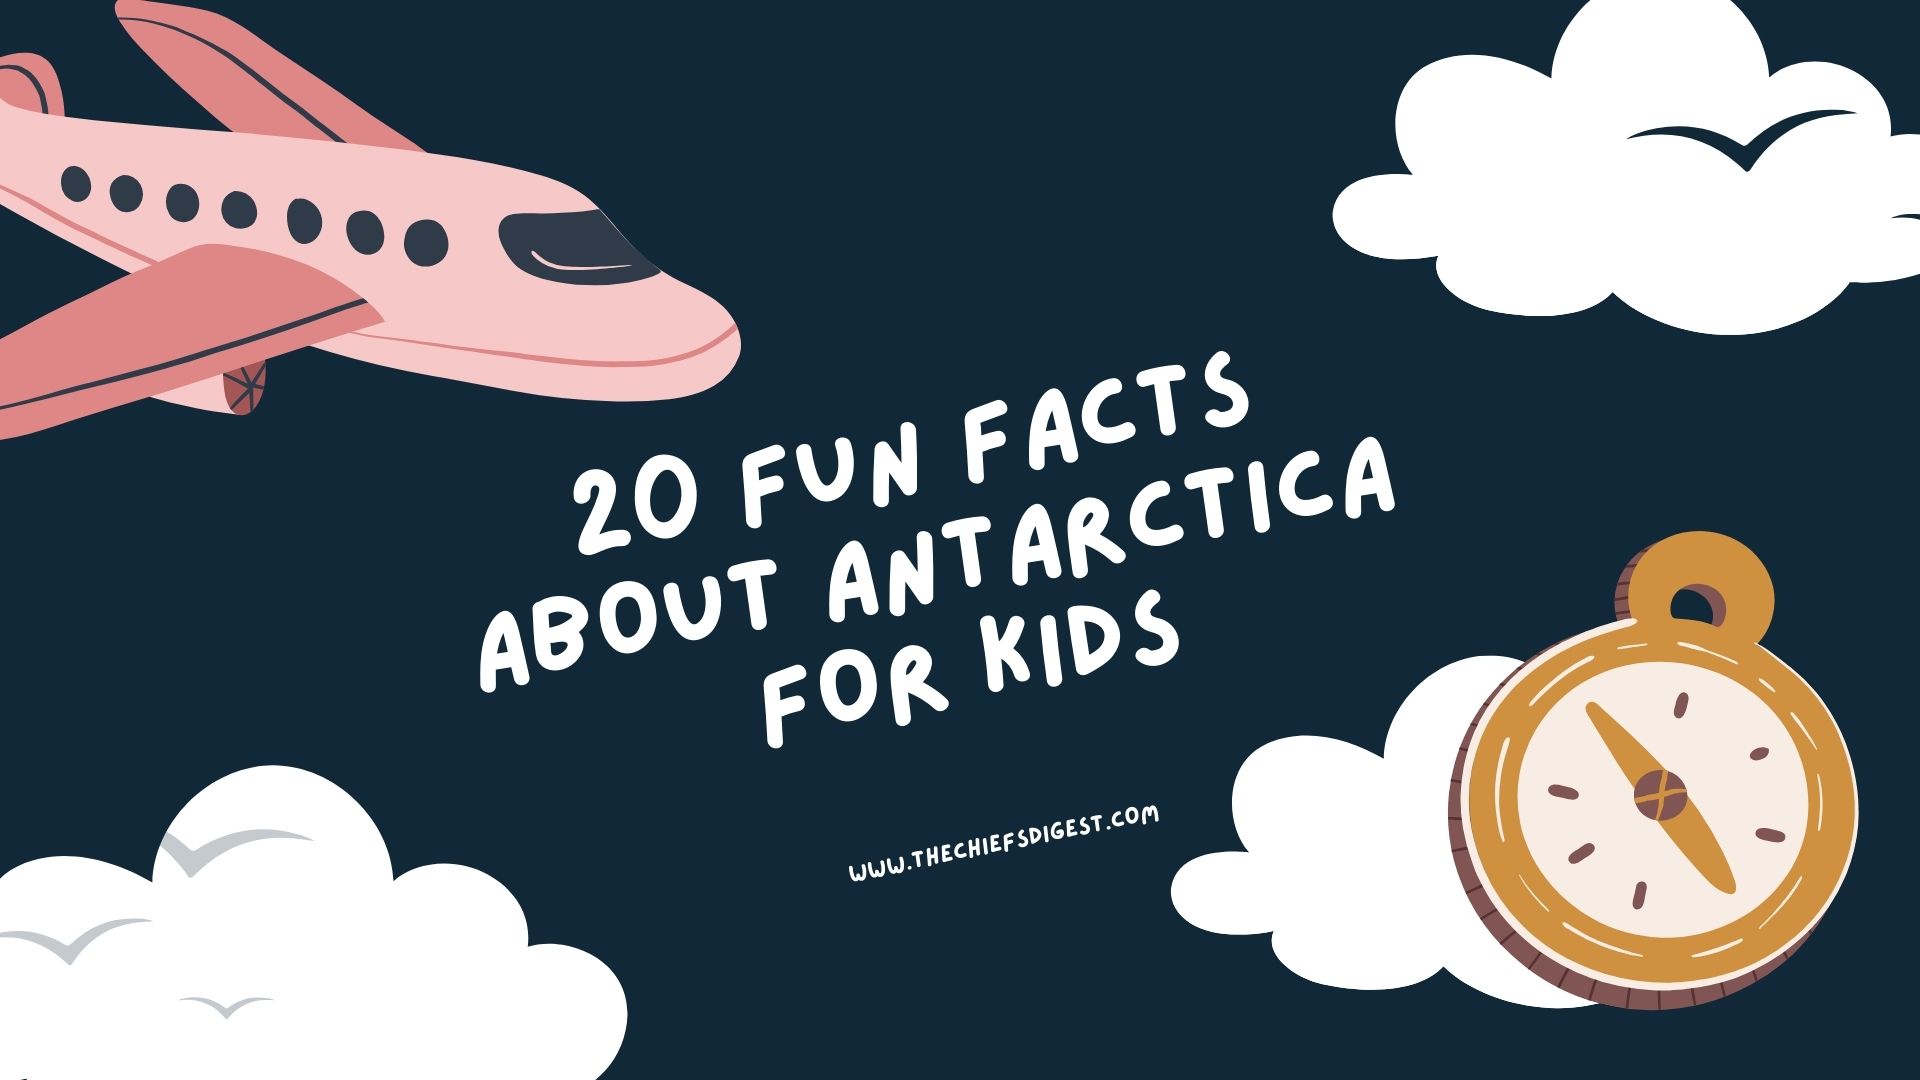 Fun Facts about Antarctica for Kids